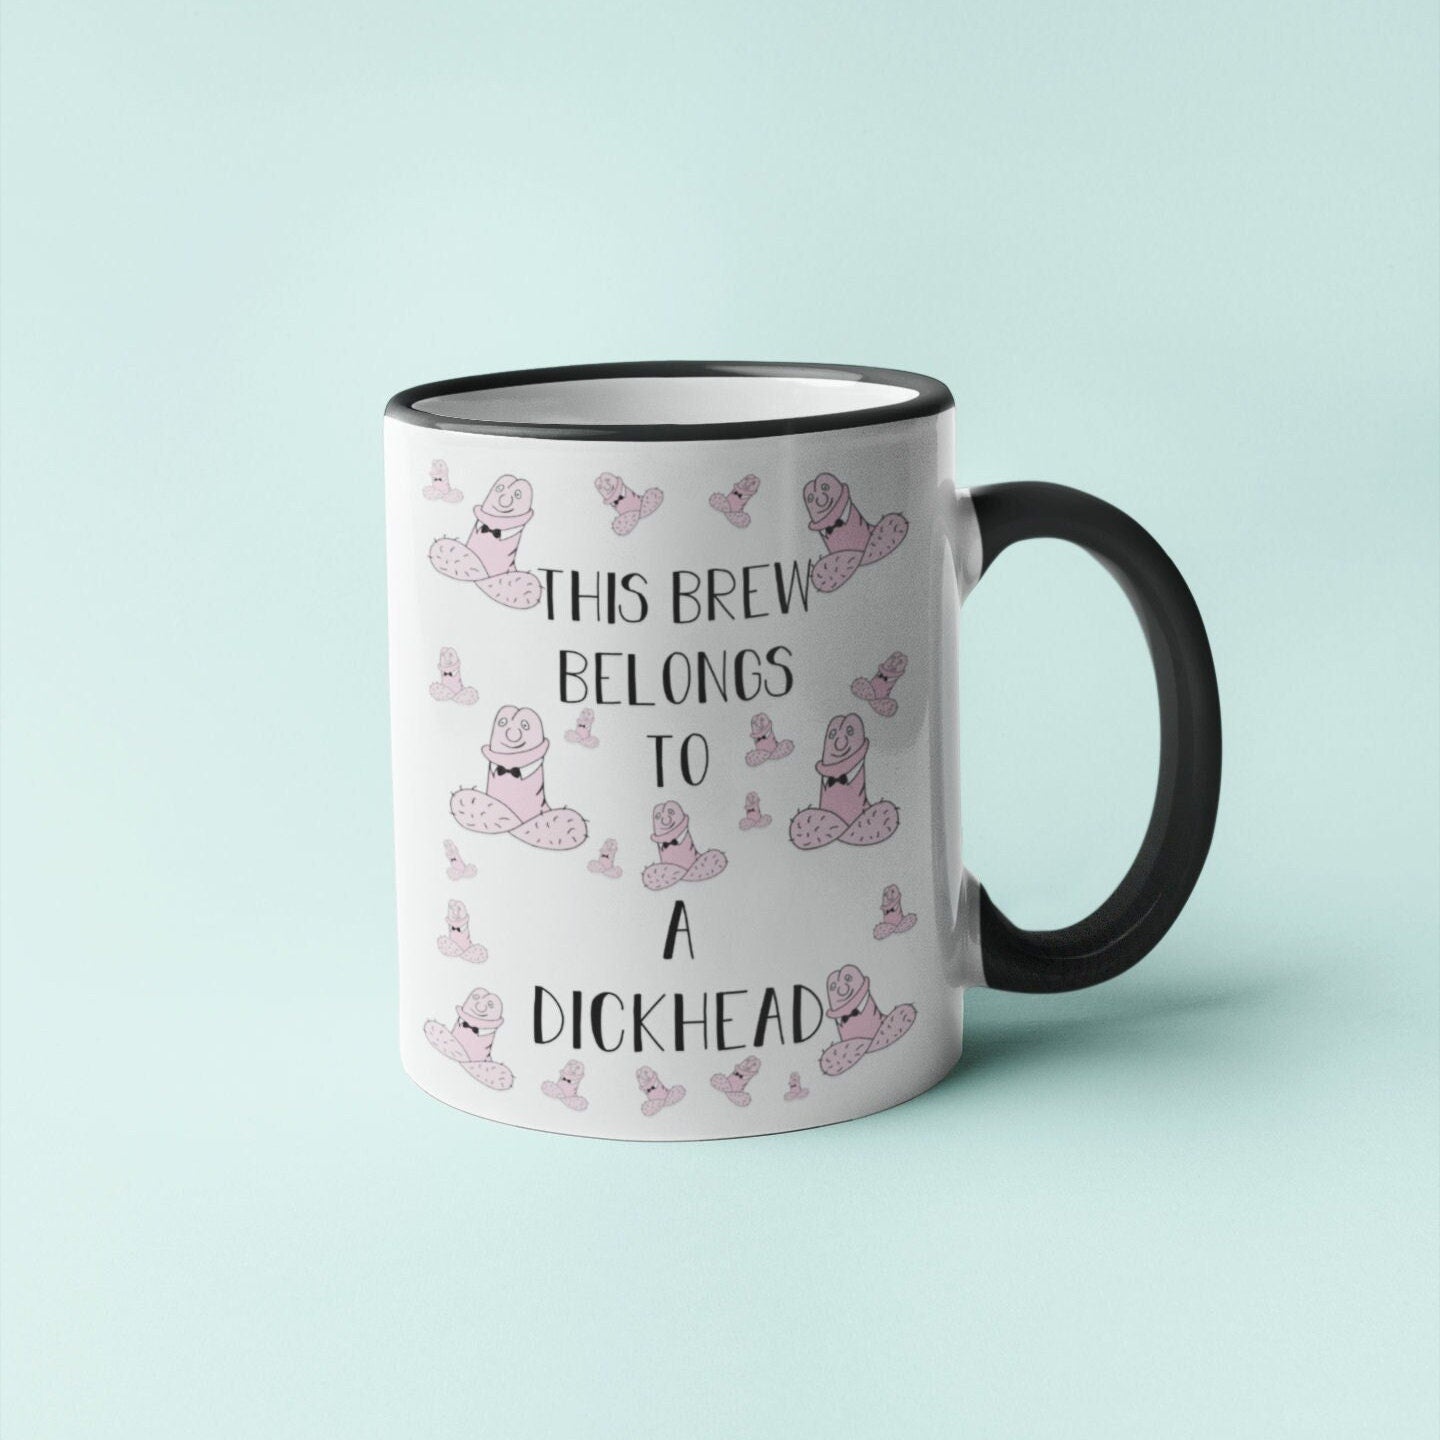 White ceramic mug with a black handle & a funny penis design printed to the front. Includes the quote 'this brew belongs to a dickhead'. Printed in black ink.